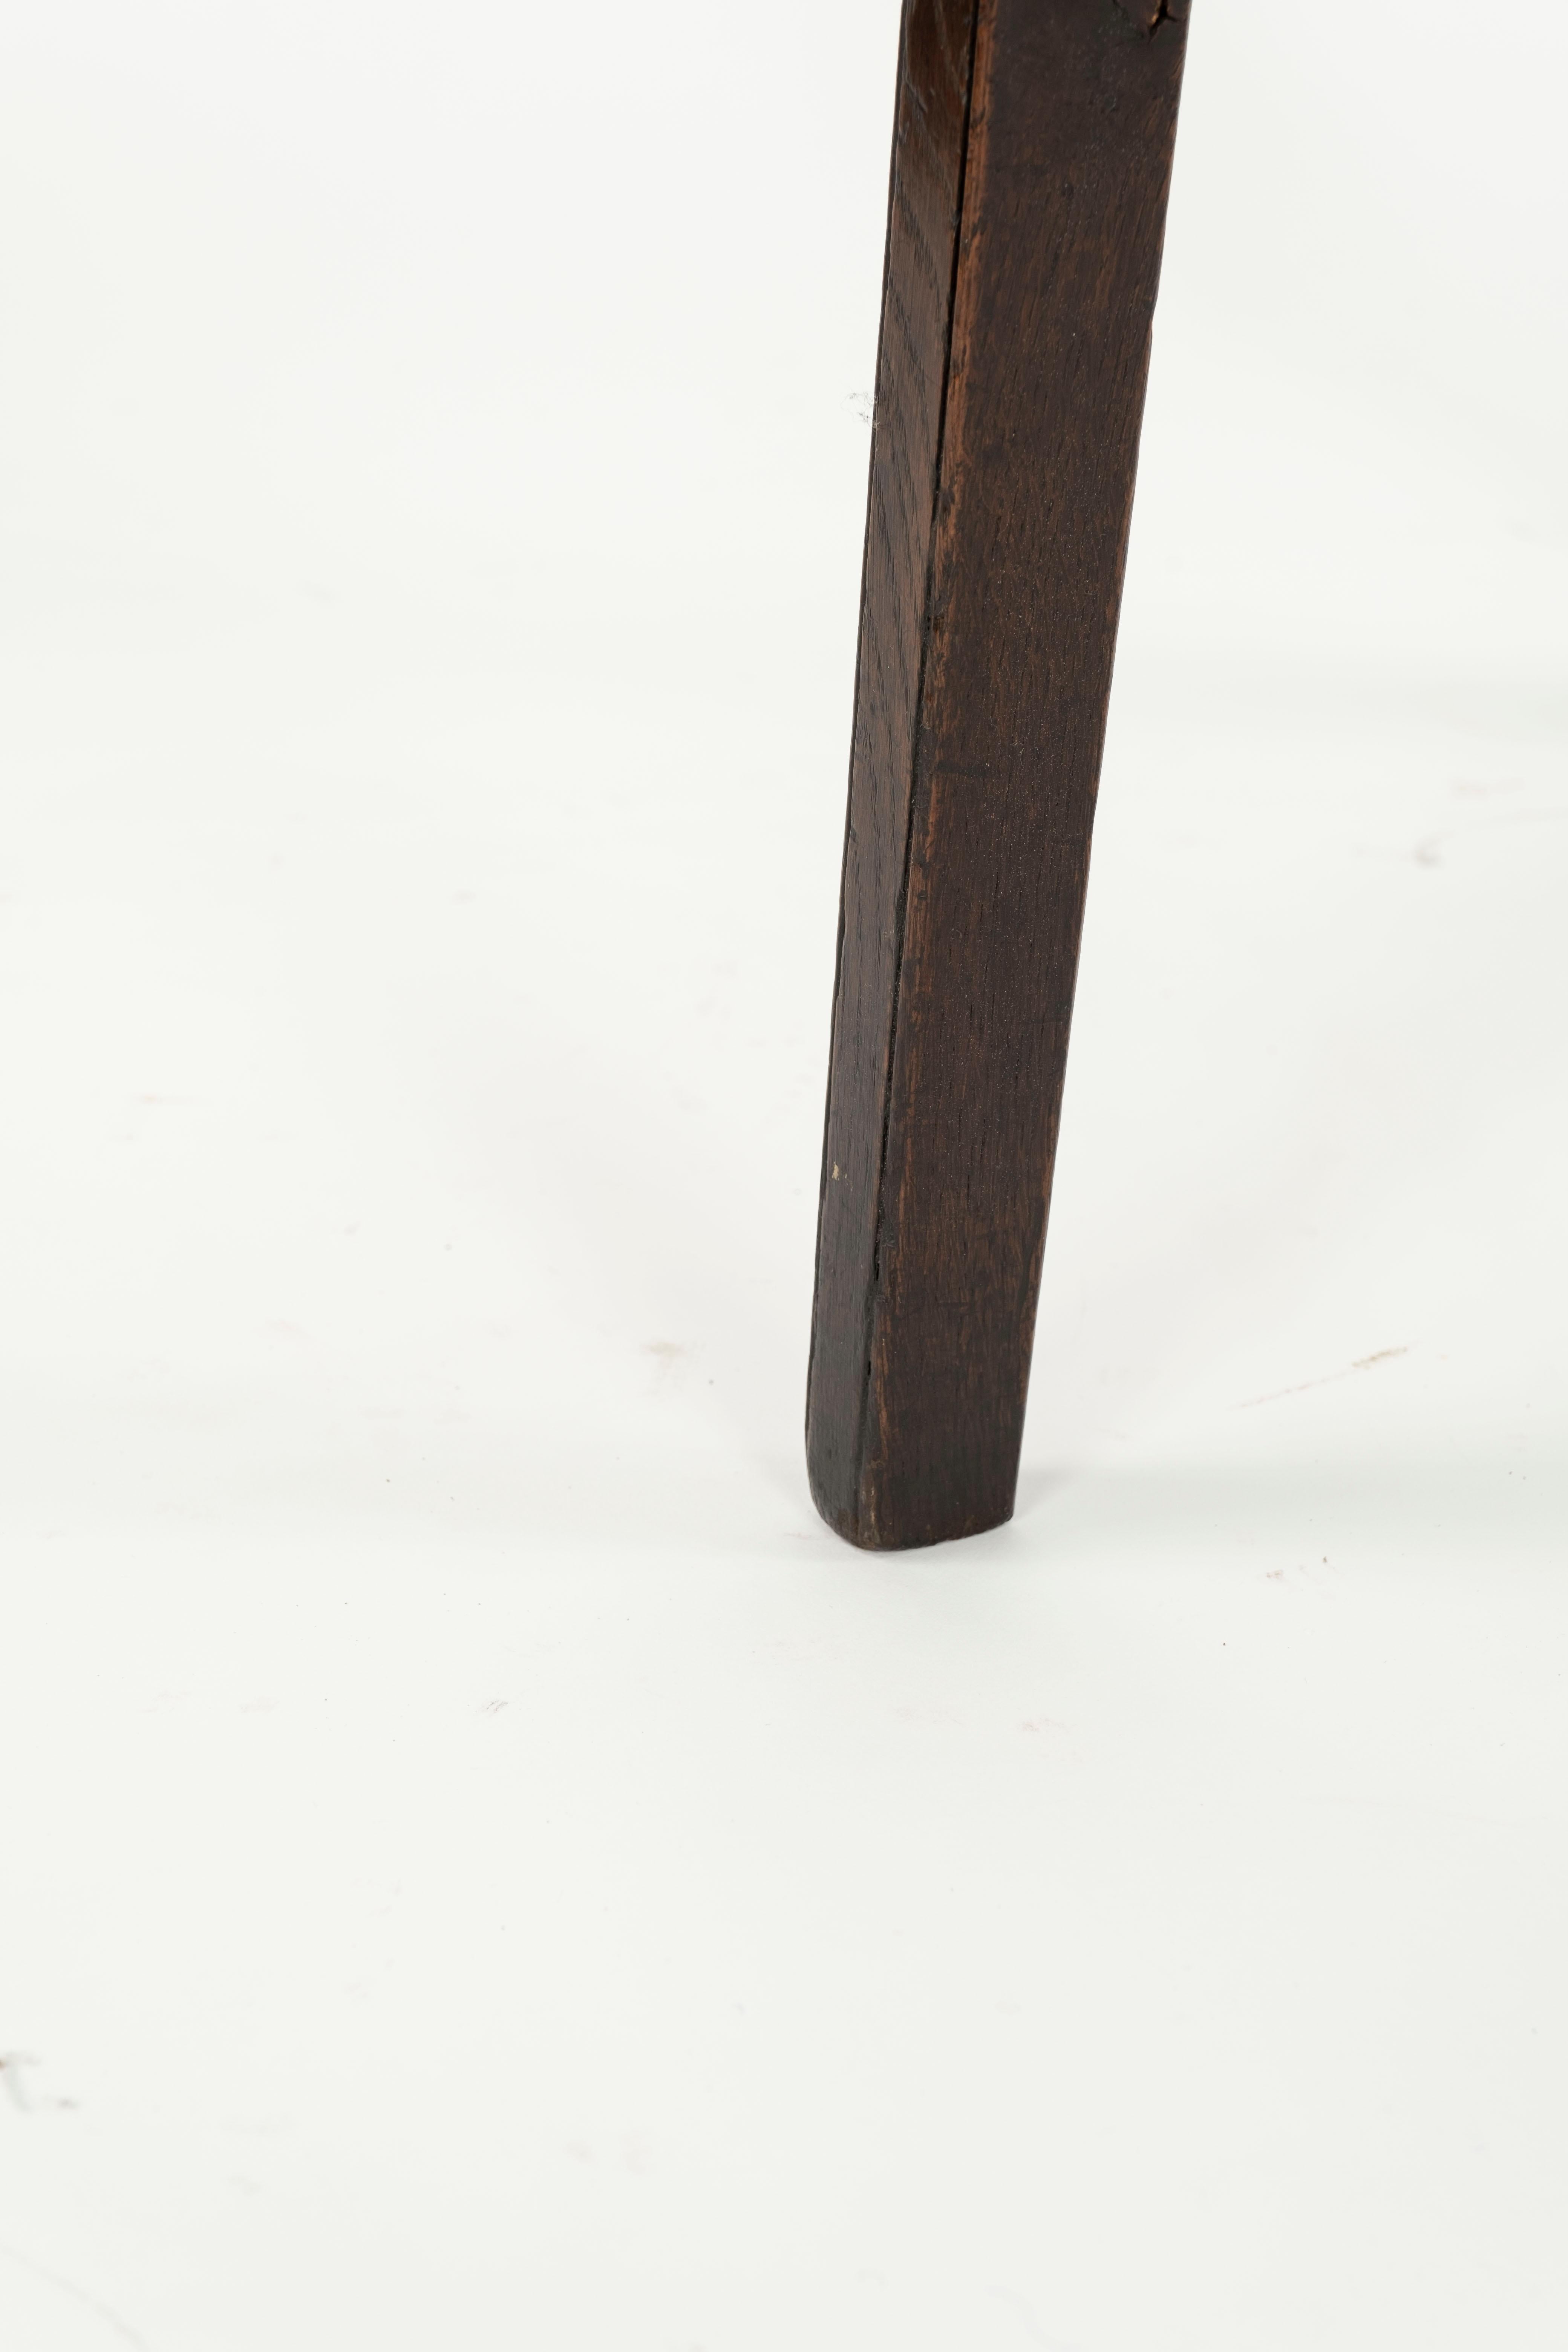 19th Century English Cricket table For Sale 4